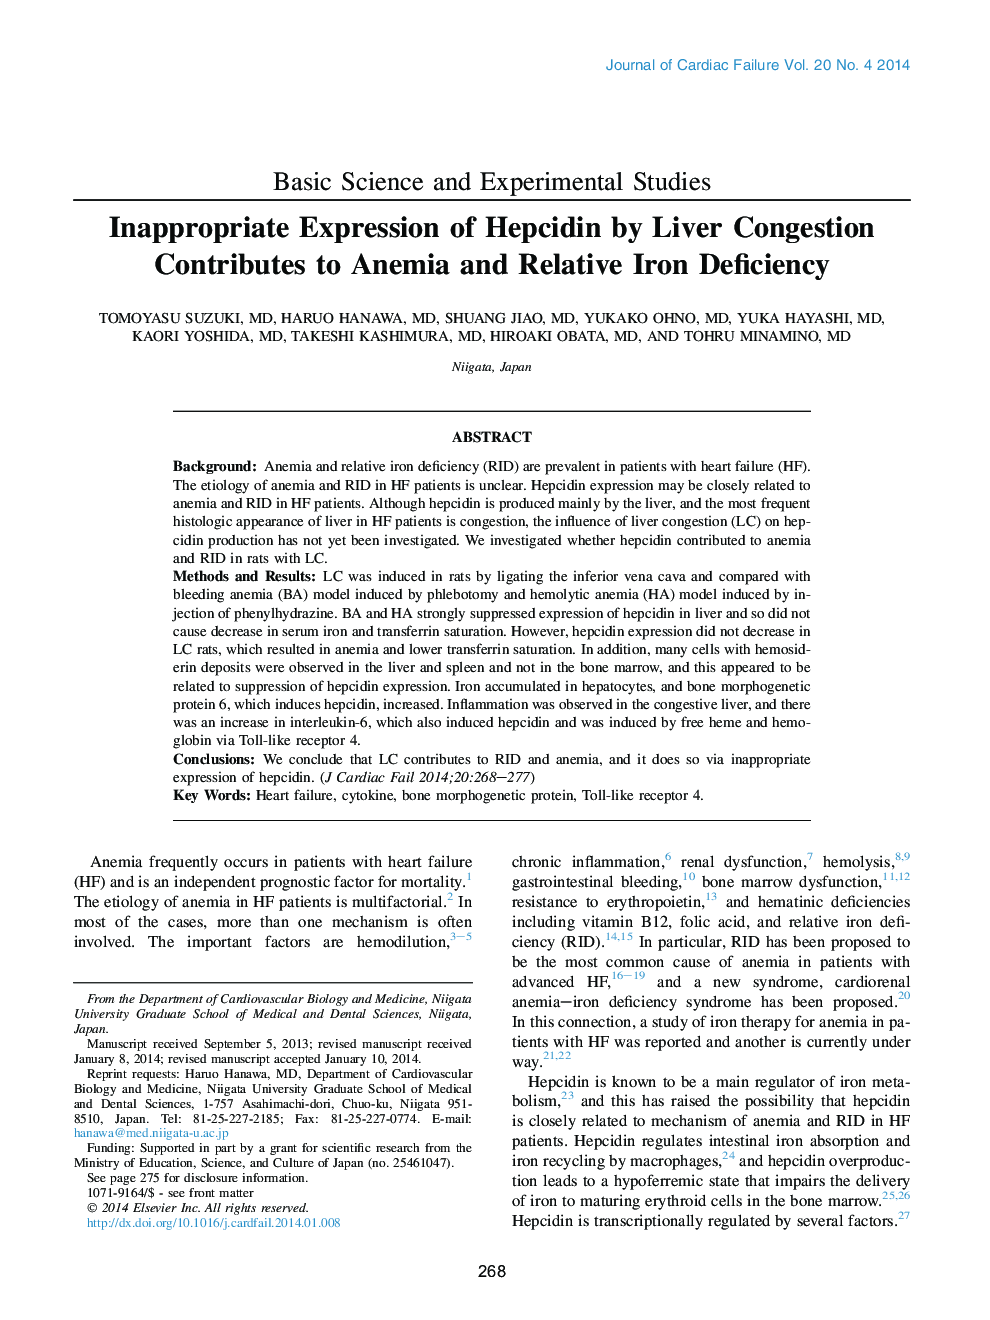 Inappropriate Expression of Hepcidin by Liver Congestion Contributes to Anemia and Relative Iron Deficiency 